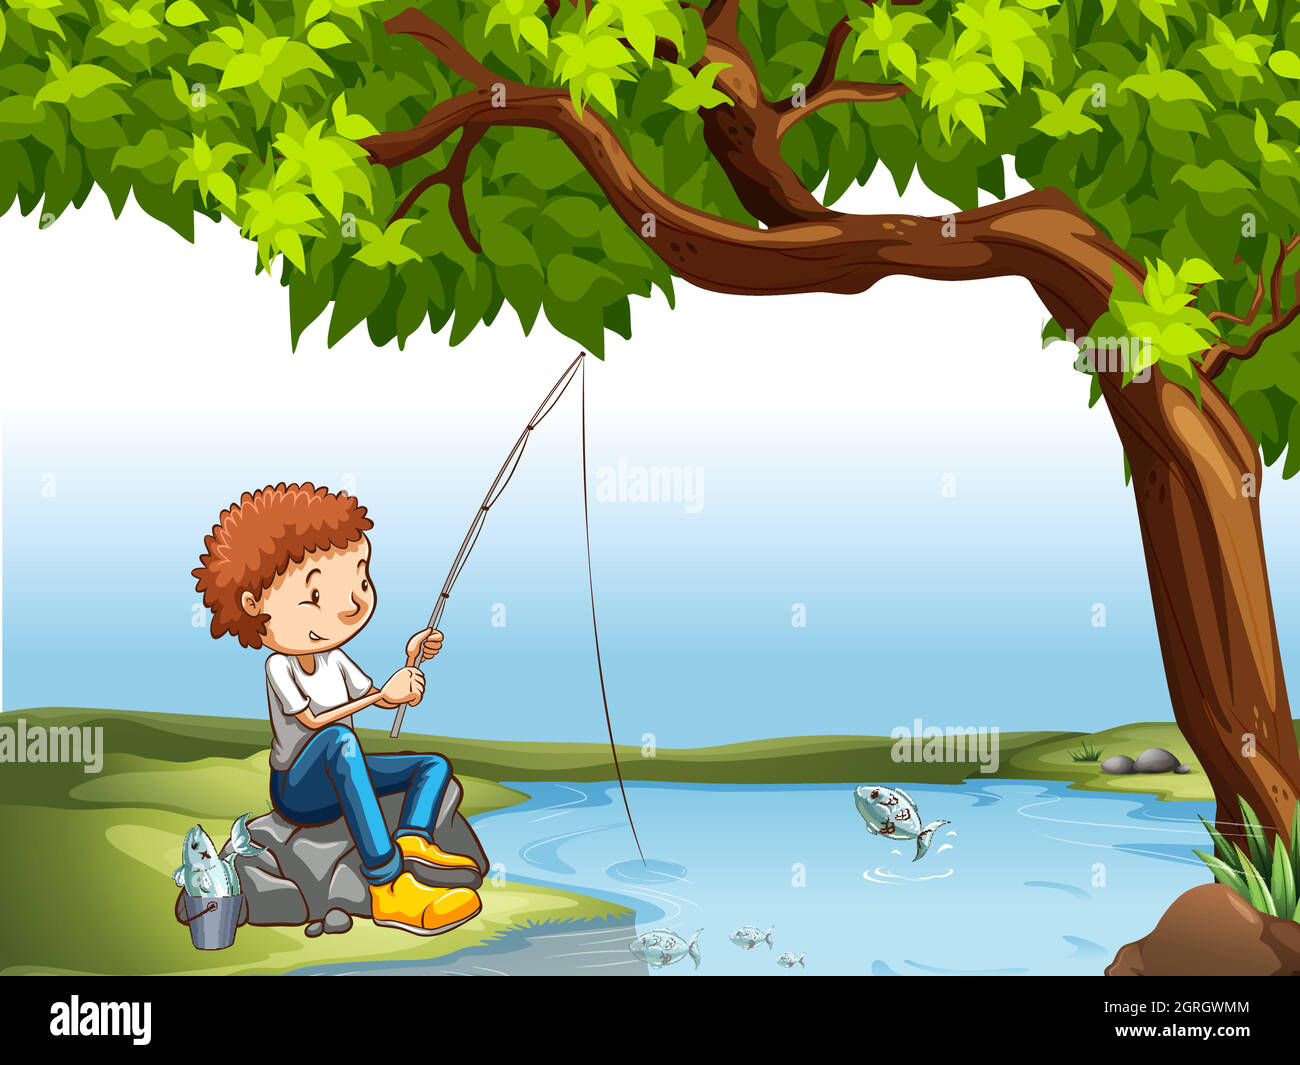 Man boy fishing rod river Stock Vector Images - Alamy